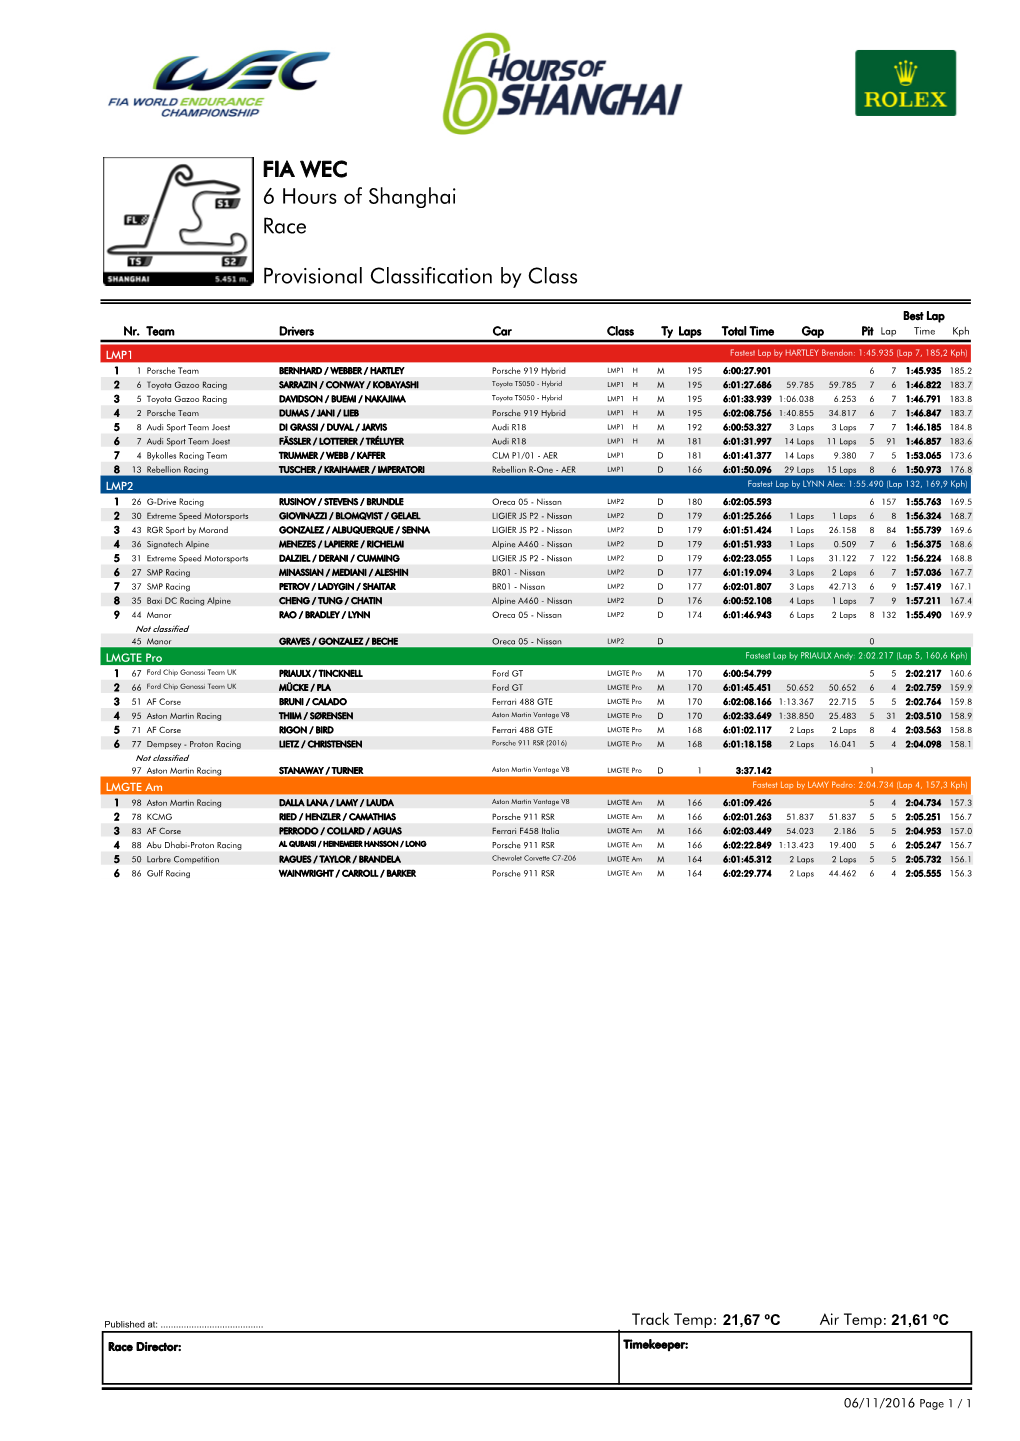 Race 6 Hours of Shanghai FIA WEC Provisional Classification by Class